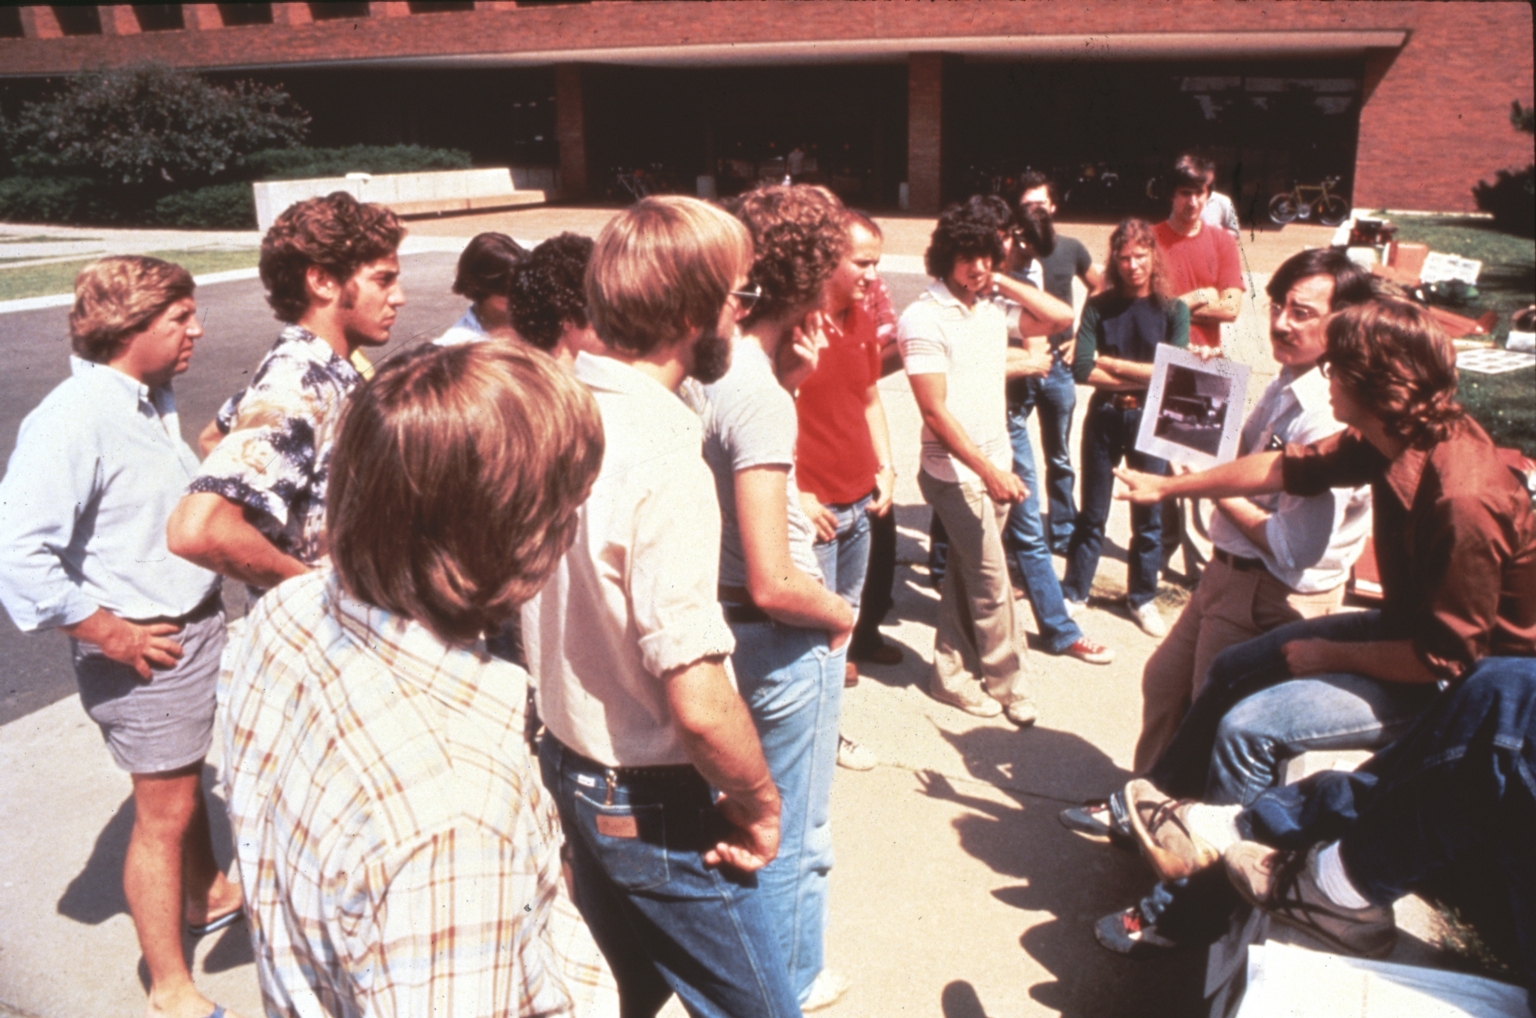 Students gather around professor for Class Outside